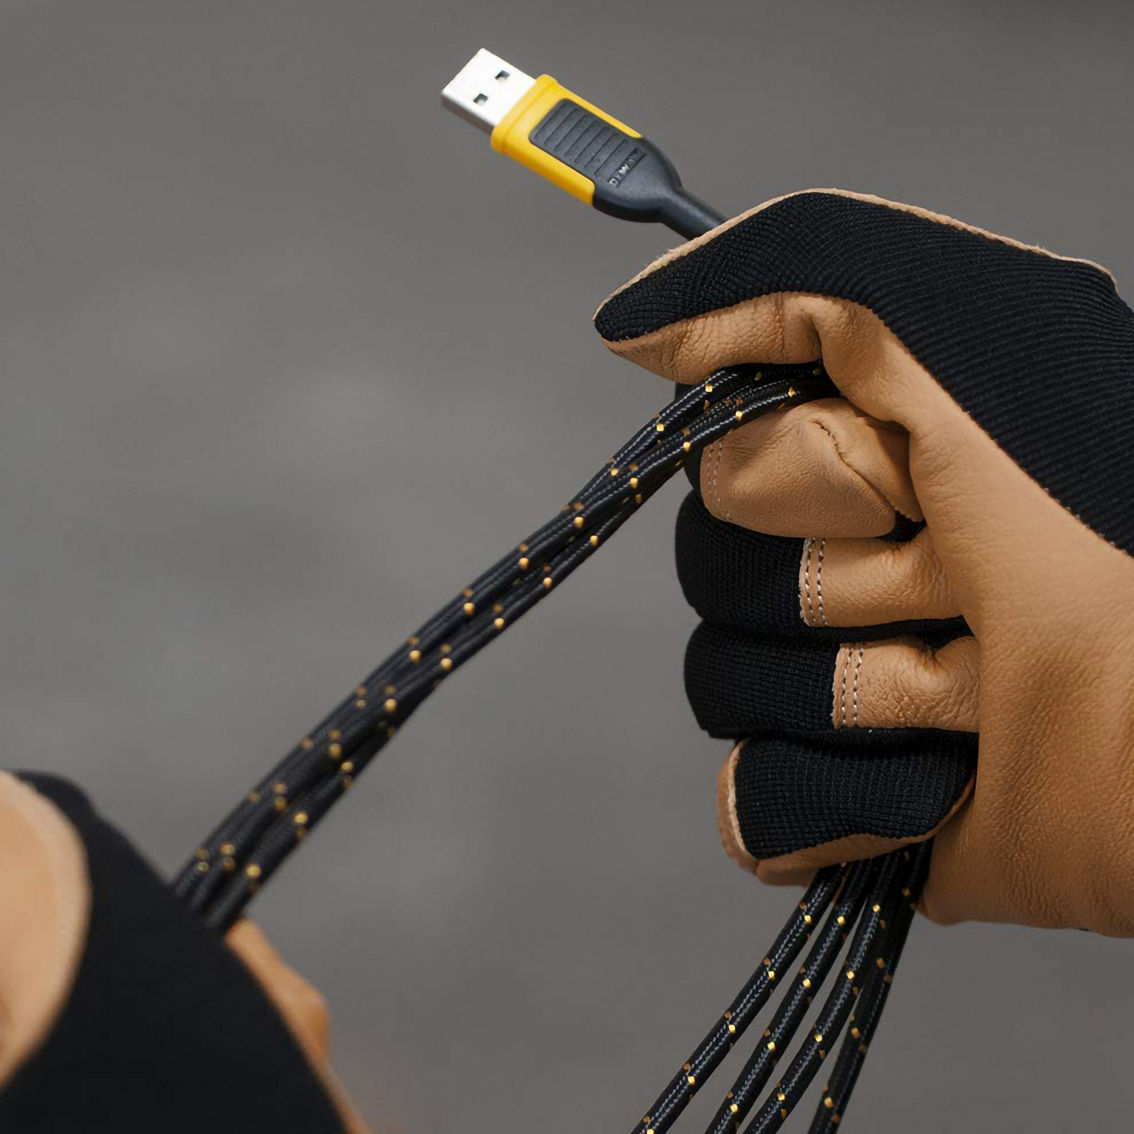 DeWalt 6 ft. Reinforced Braided Charging Cable for Micro-USB - Image 4 of 4